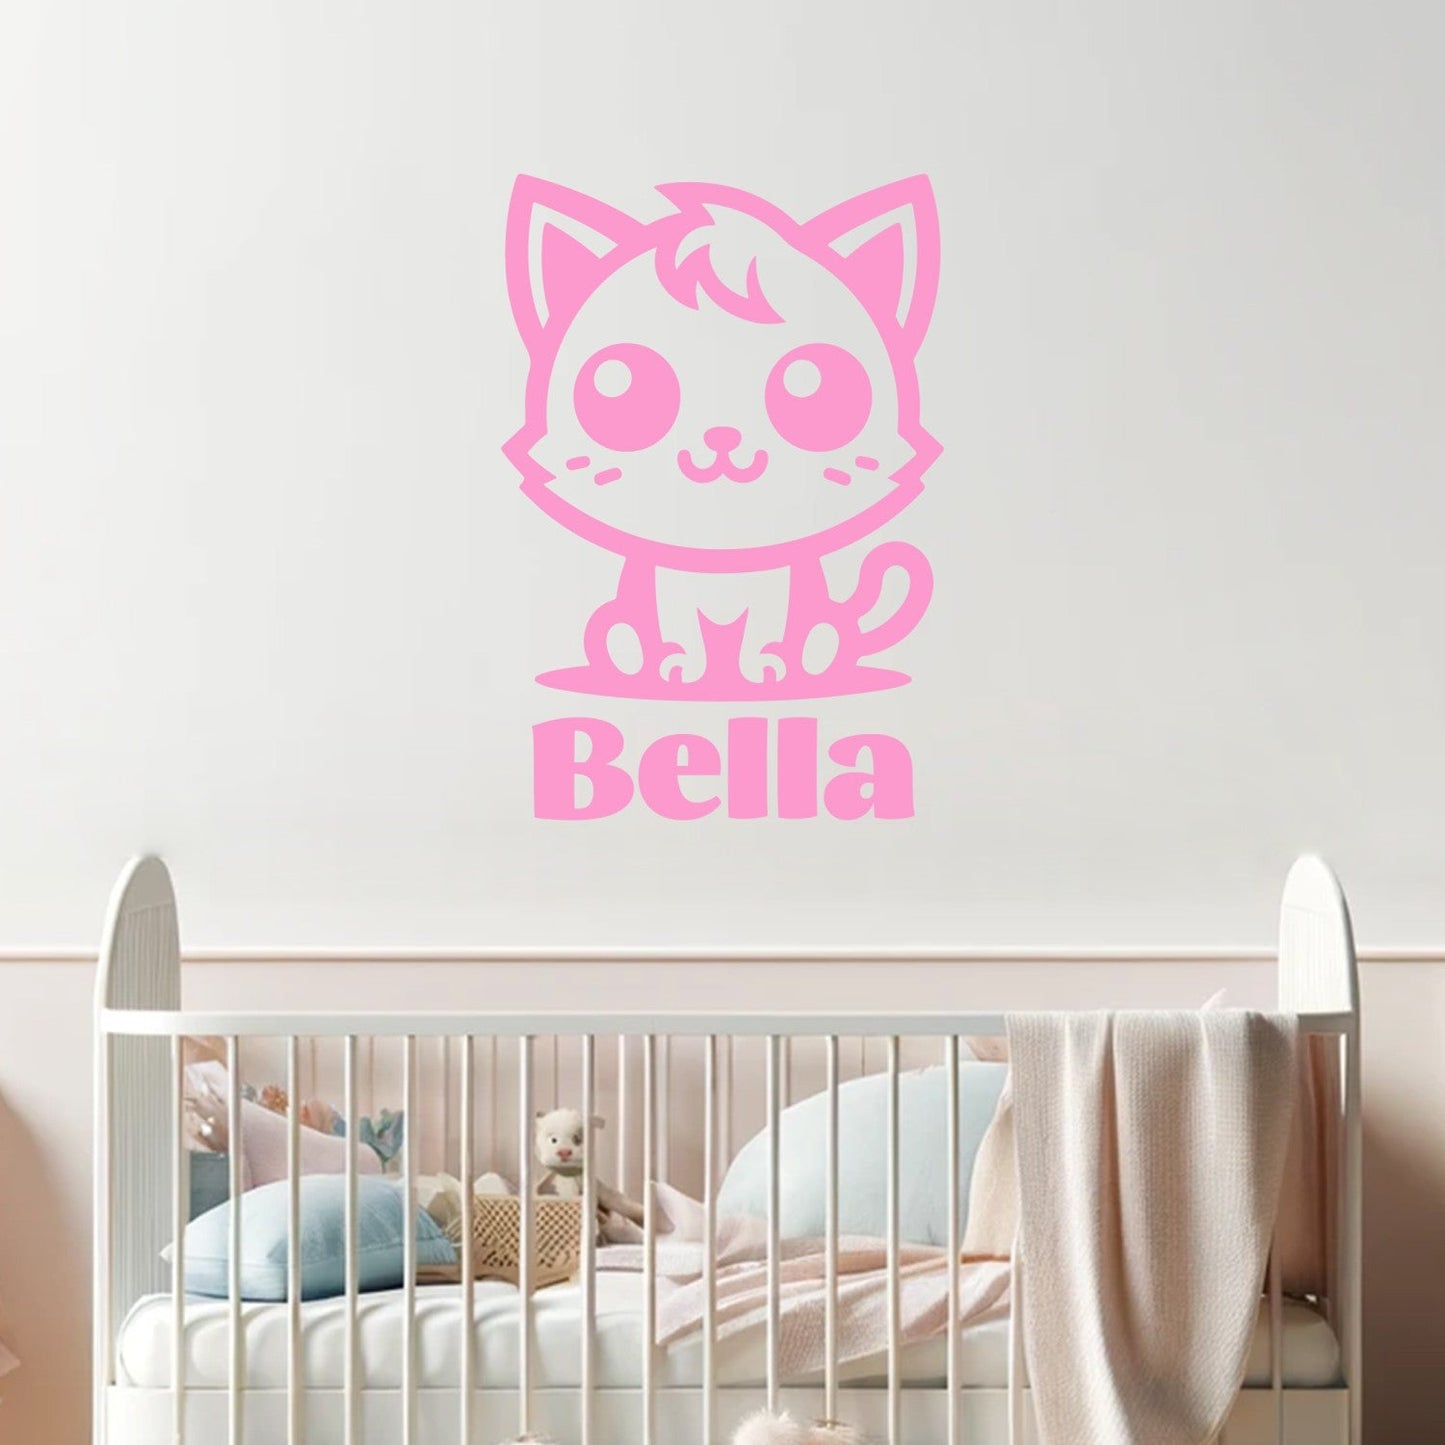 Cat Decals for Walls - Animal Wall Stickers for Kids - Cat Wall Stickers with Name - Personalized Nursery Decals for Kids Room - Cat Wall Art Stickers